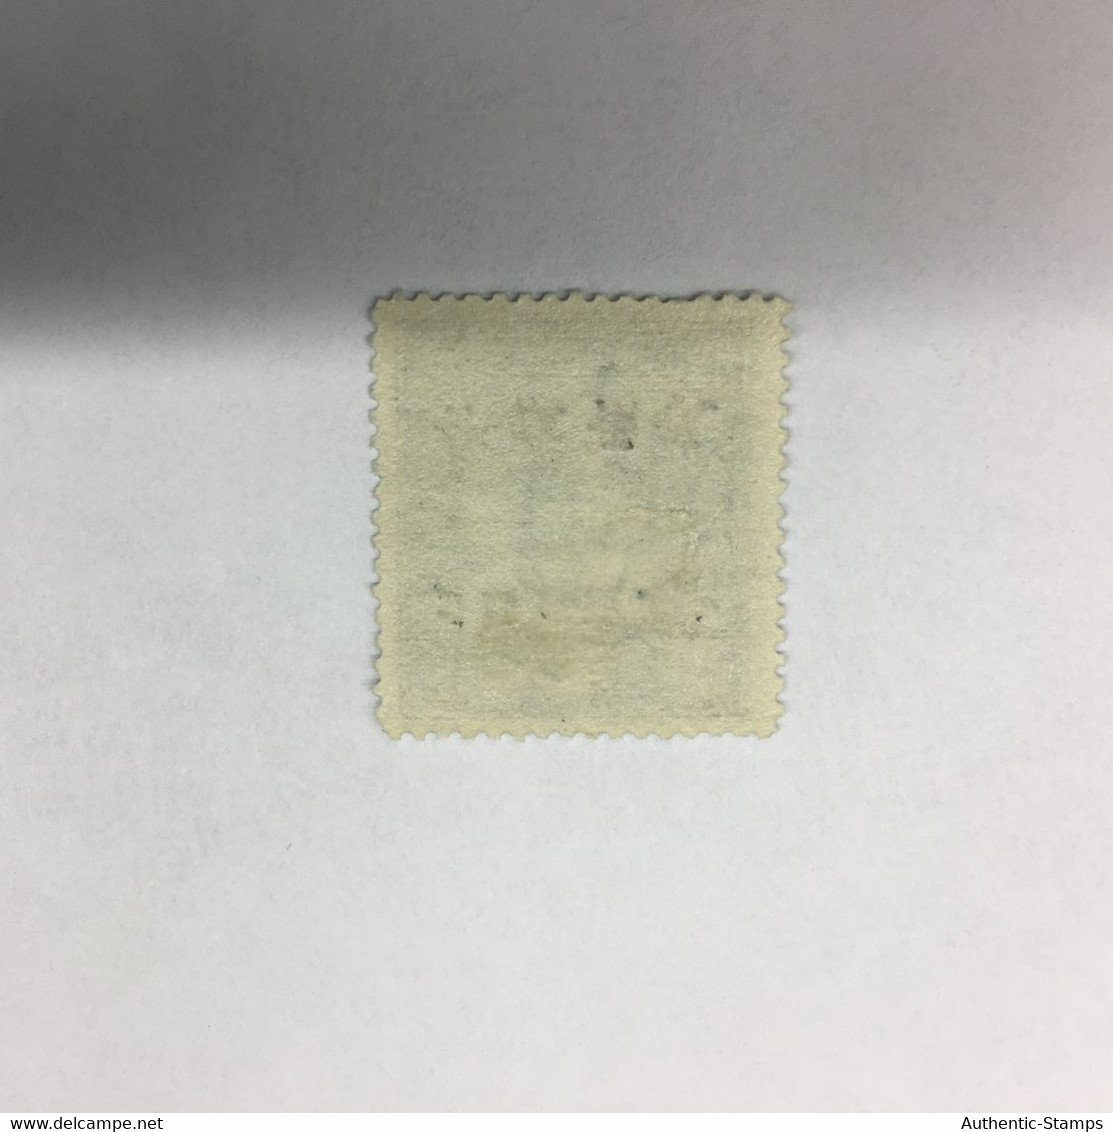 CHINA STAMP, USED, TIMBRO, STEMPEL, CINA, CHINE, LIST 5805 - 1941-45 Nordchina